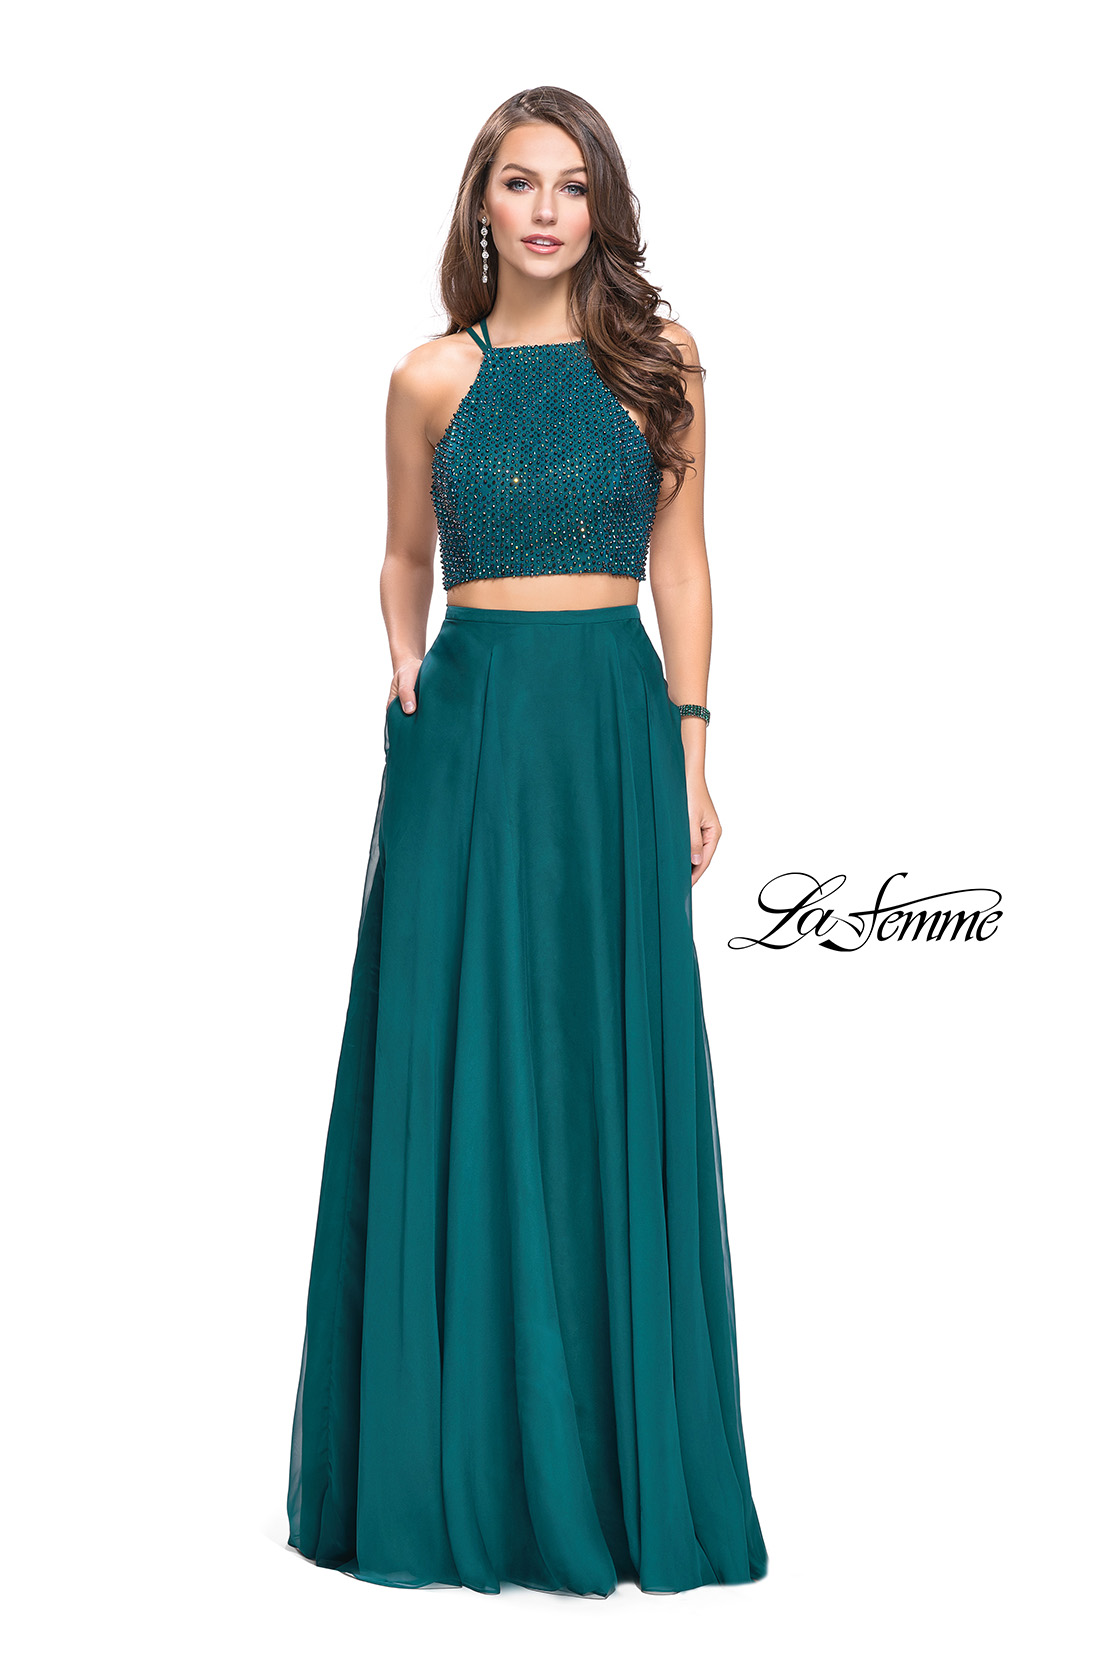 teal homecoming dresses 2022